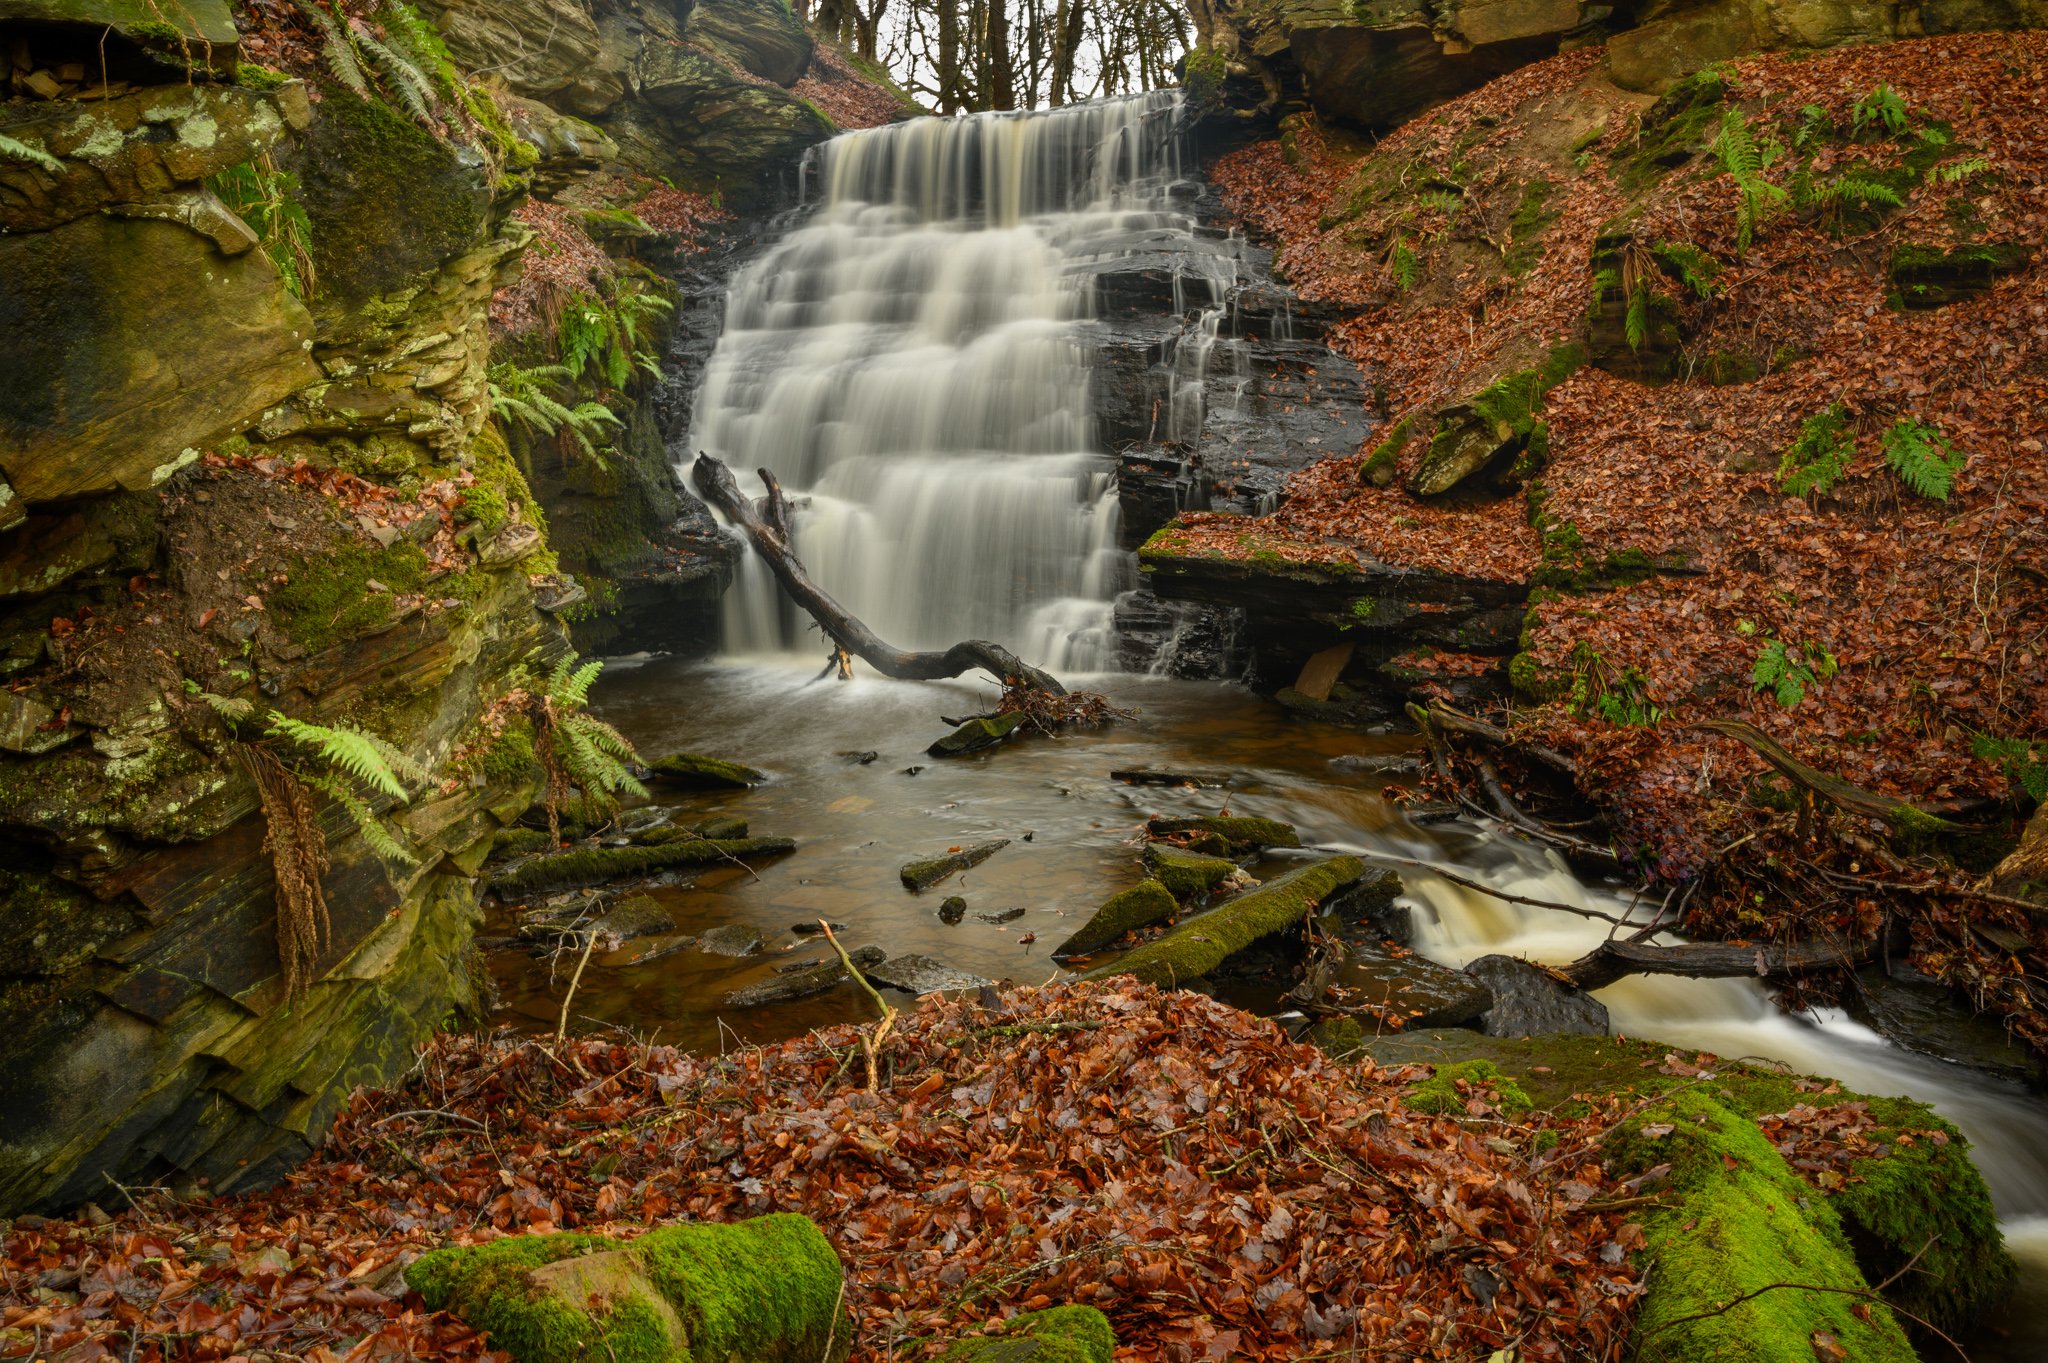 Jerry-Force-waterfall-photography (7 of 7).jpg